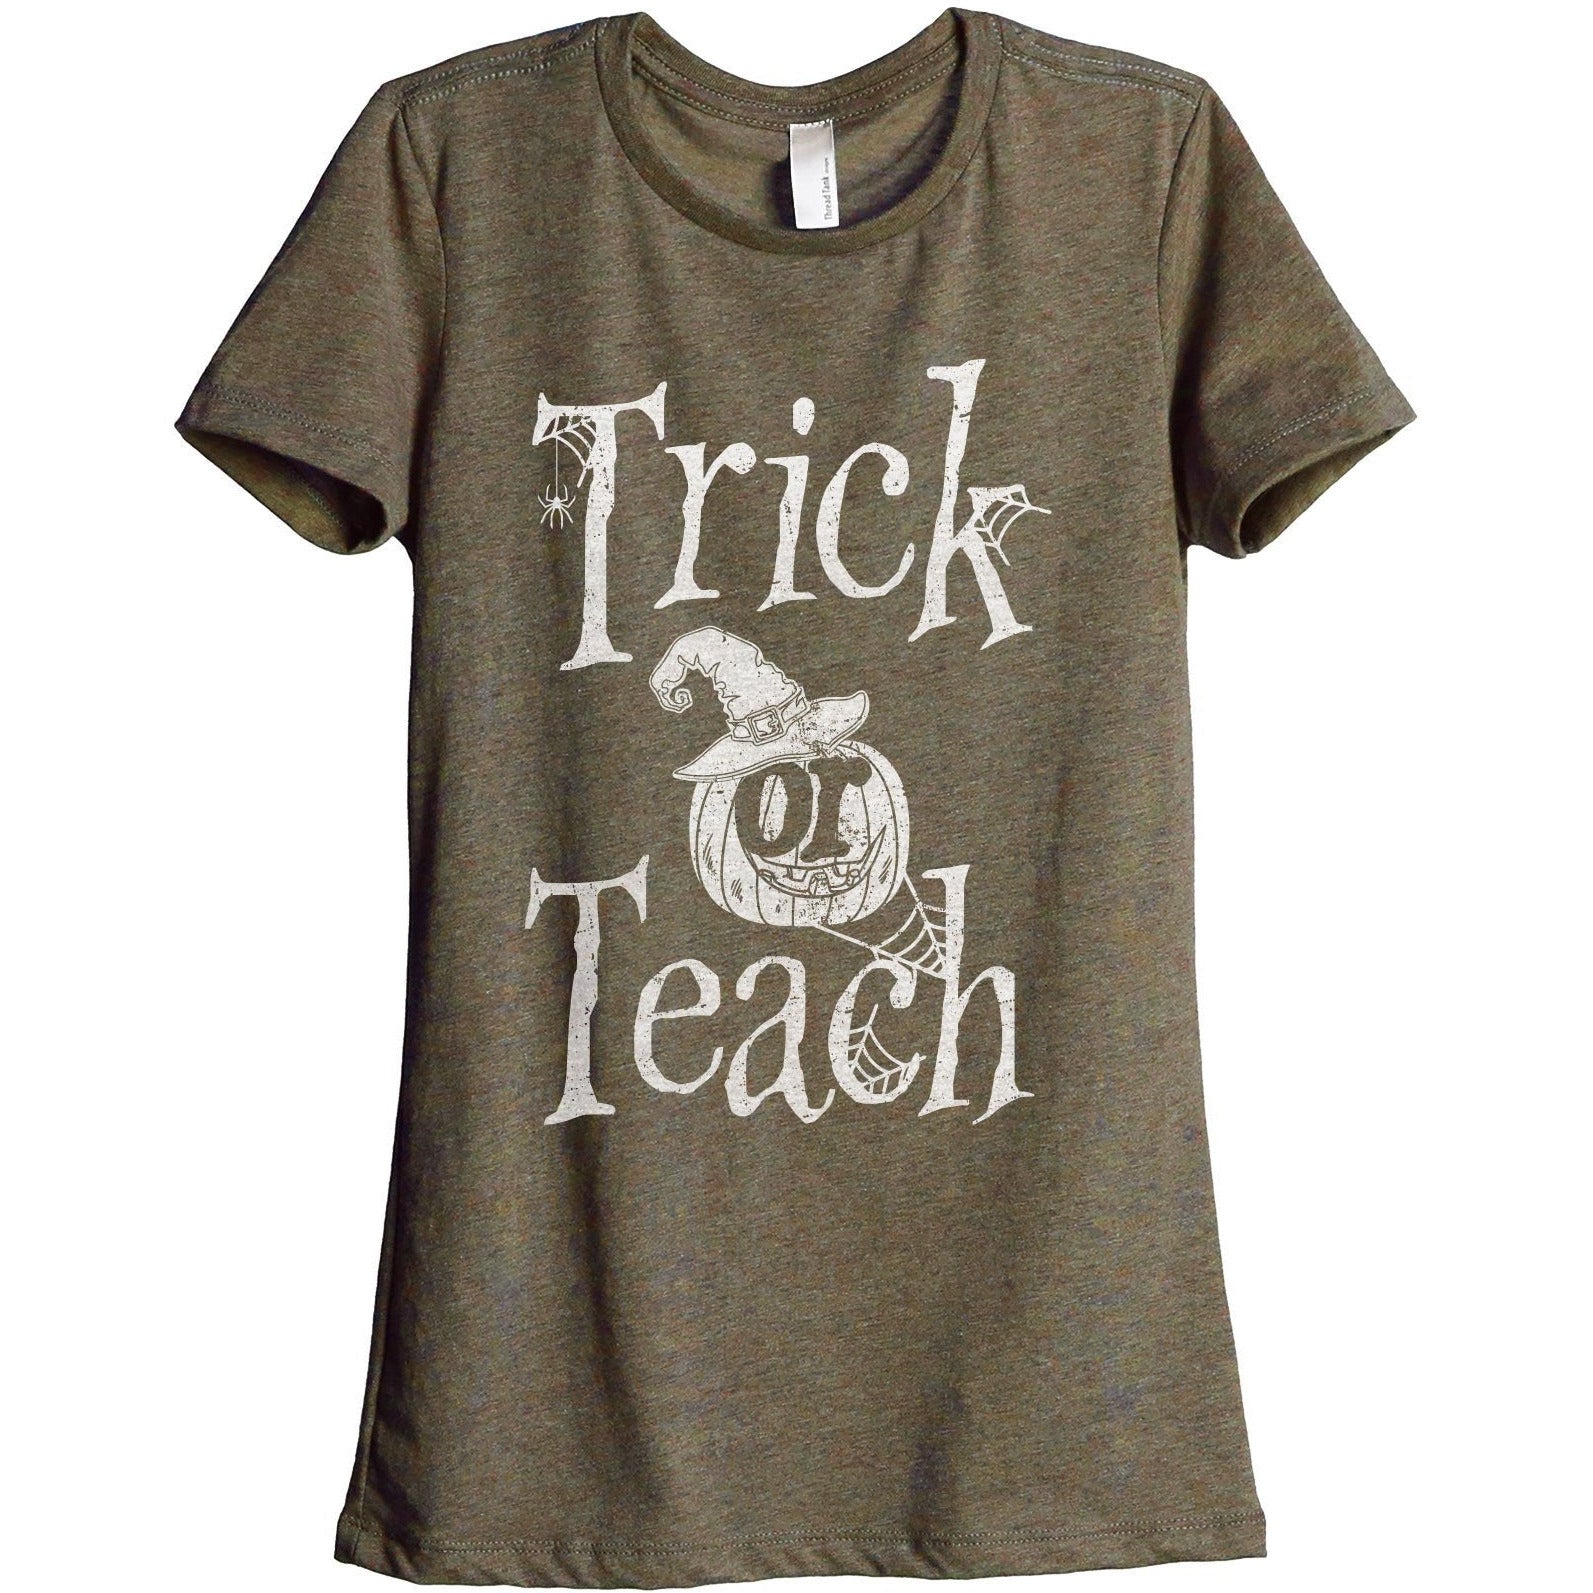 Trick Or Teach - thread tank | Stories you can wear.